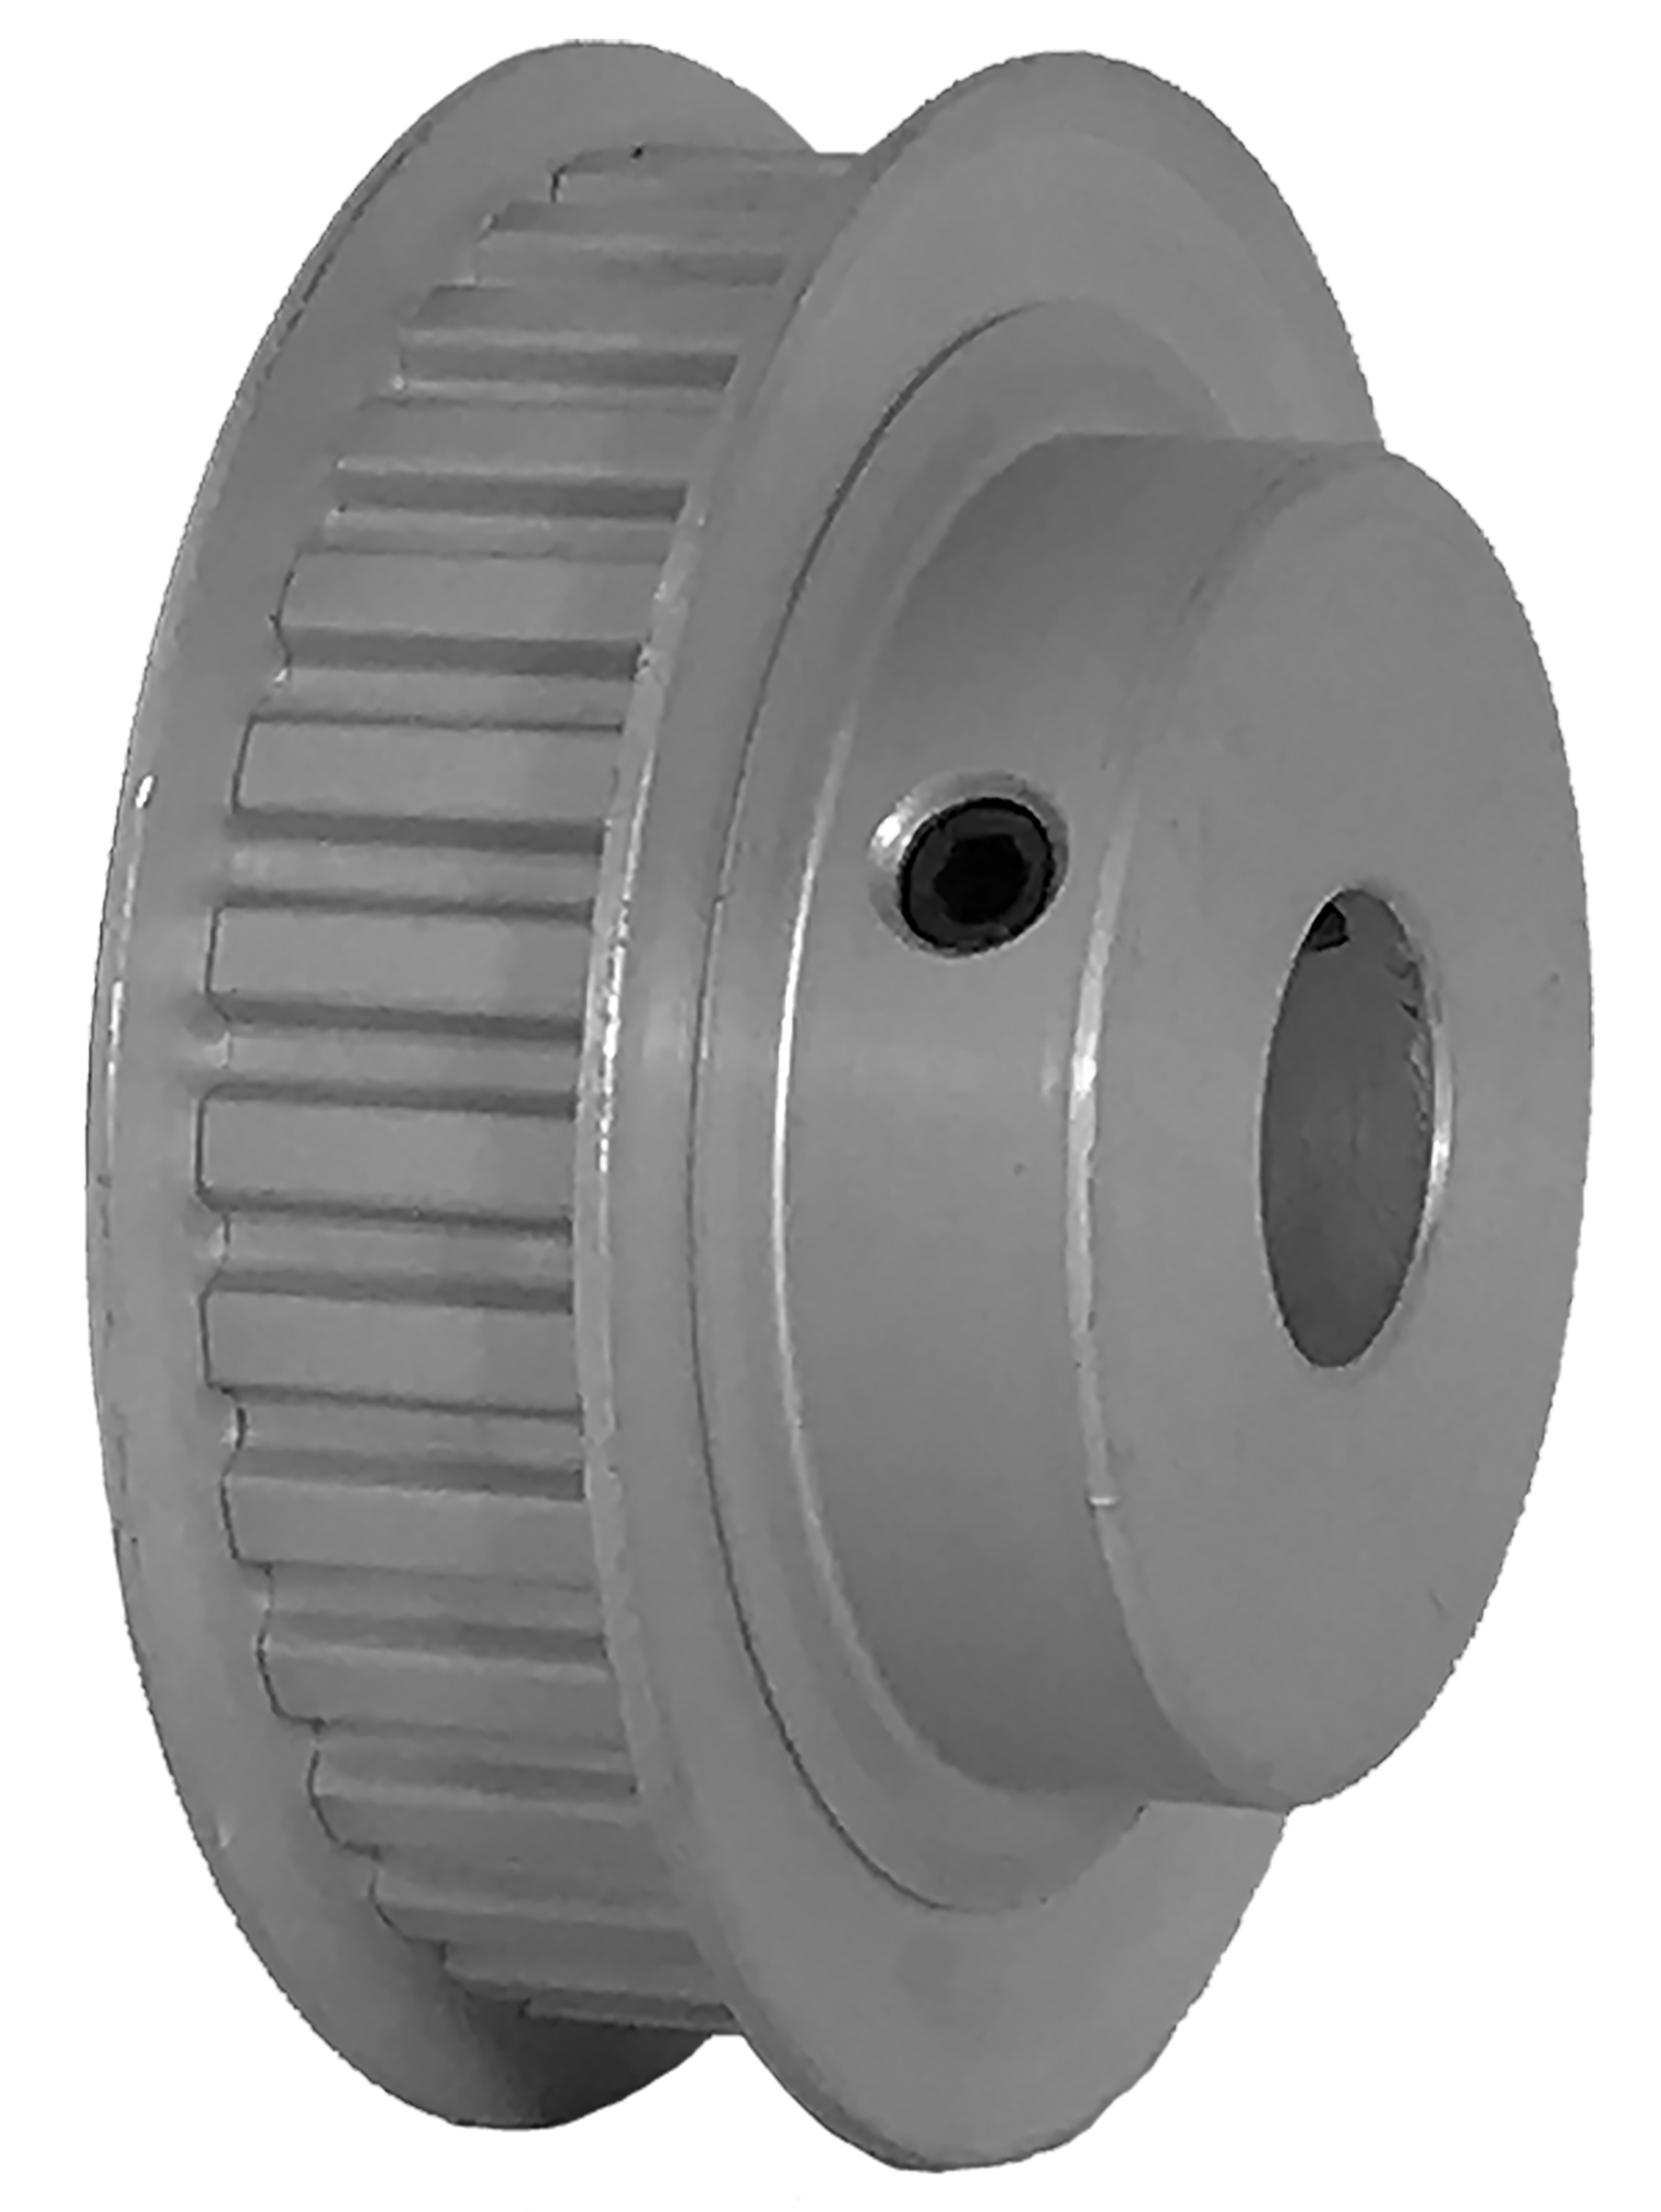 32XL037-6FA6 - Aluminum Imperial Pitch Pulleys